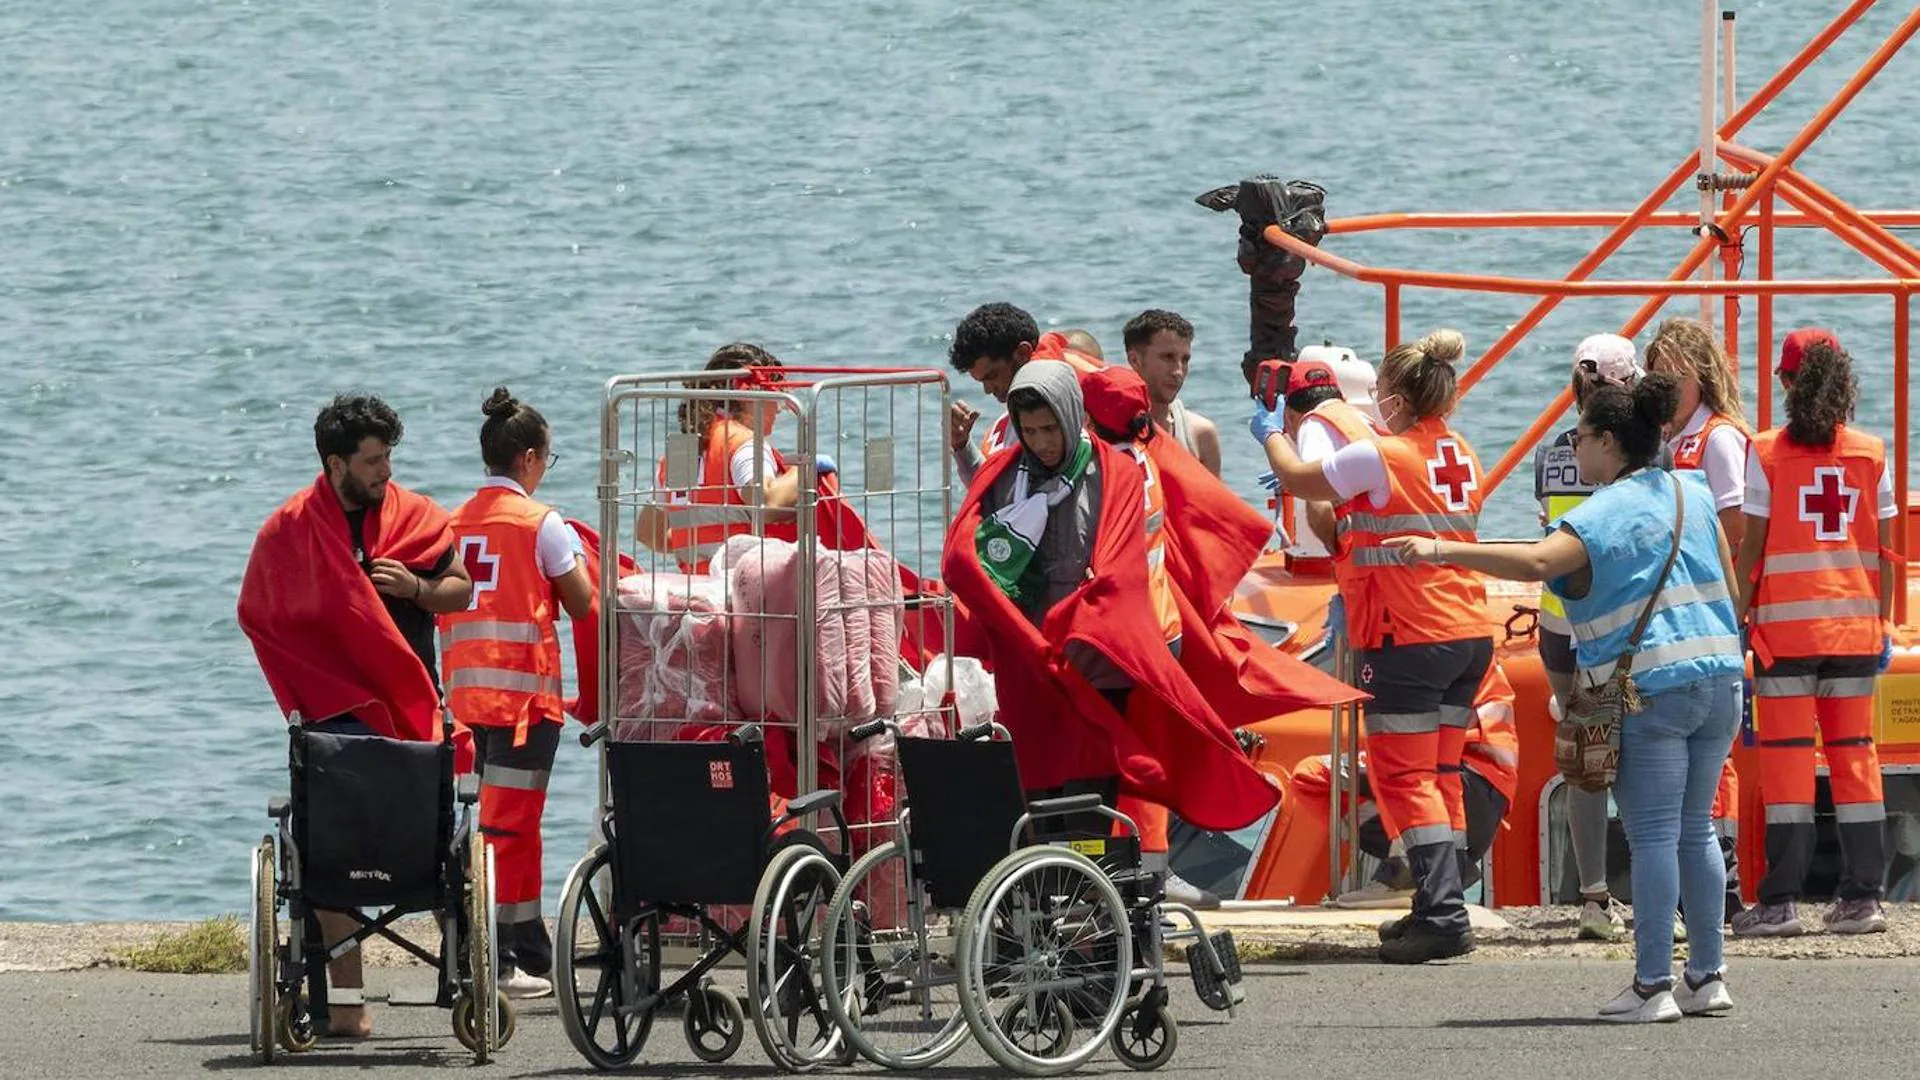 They rescued more than 300 people near Lanzarote in the last 24 hours